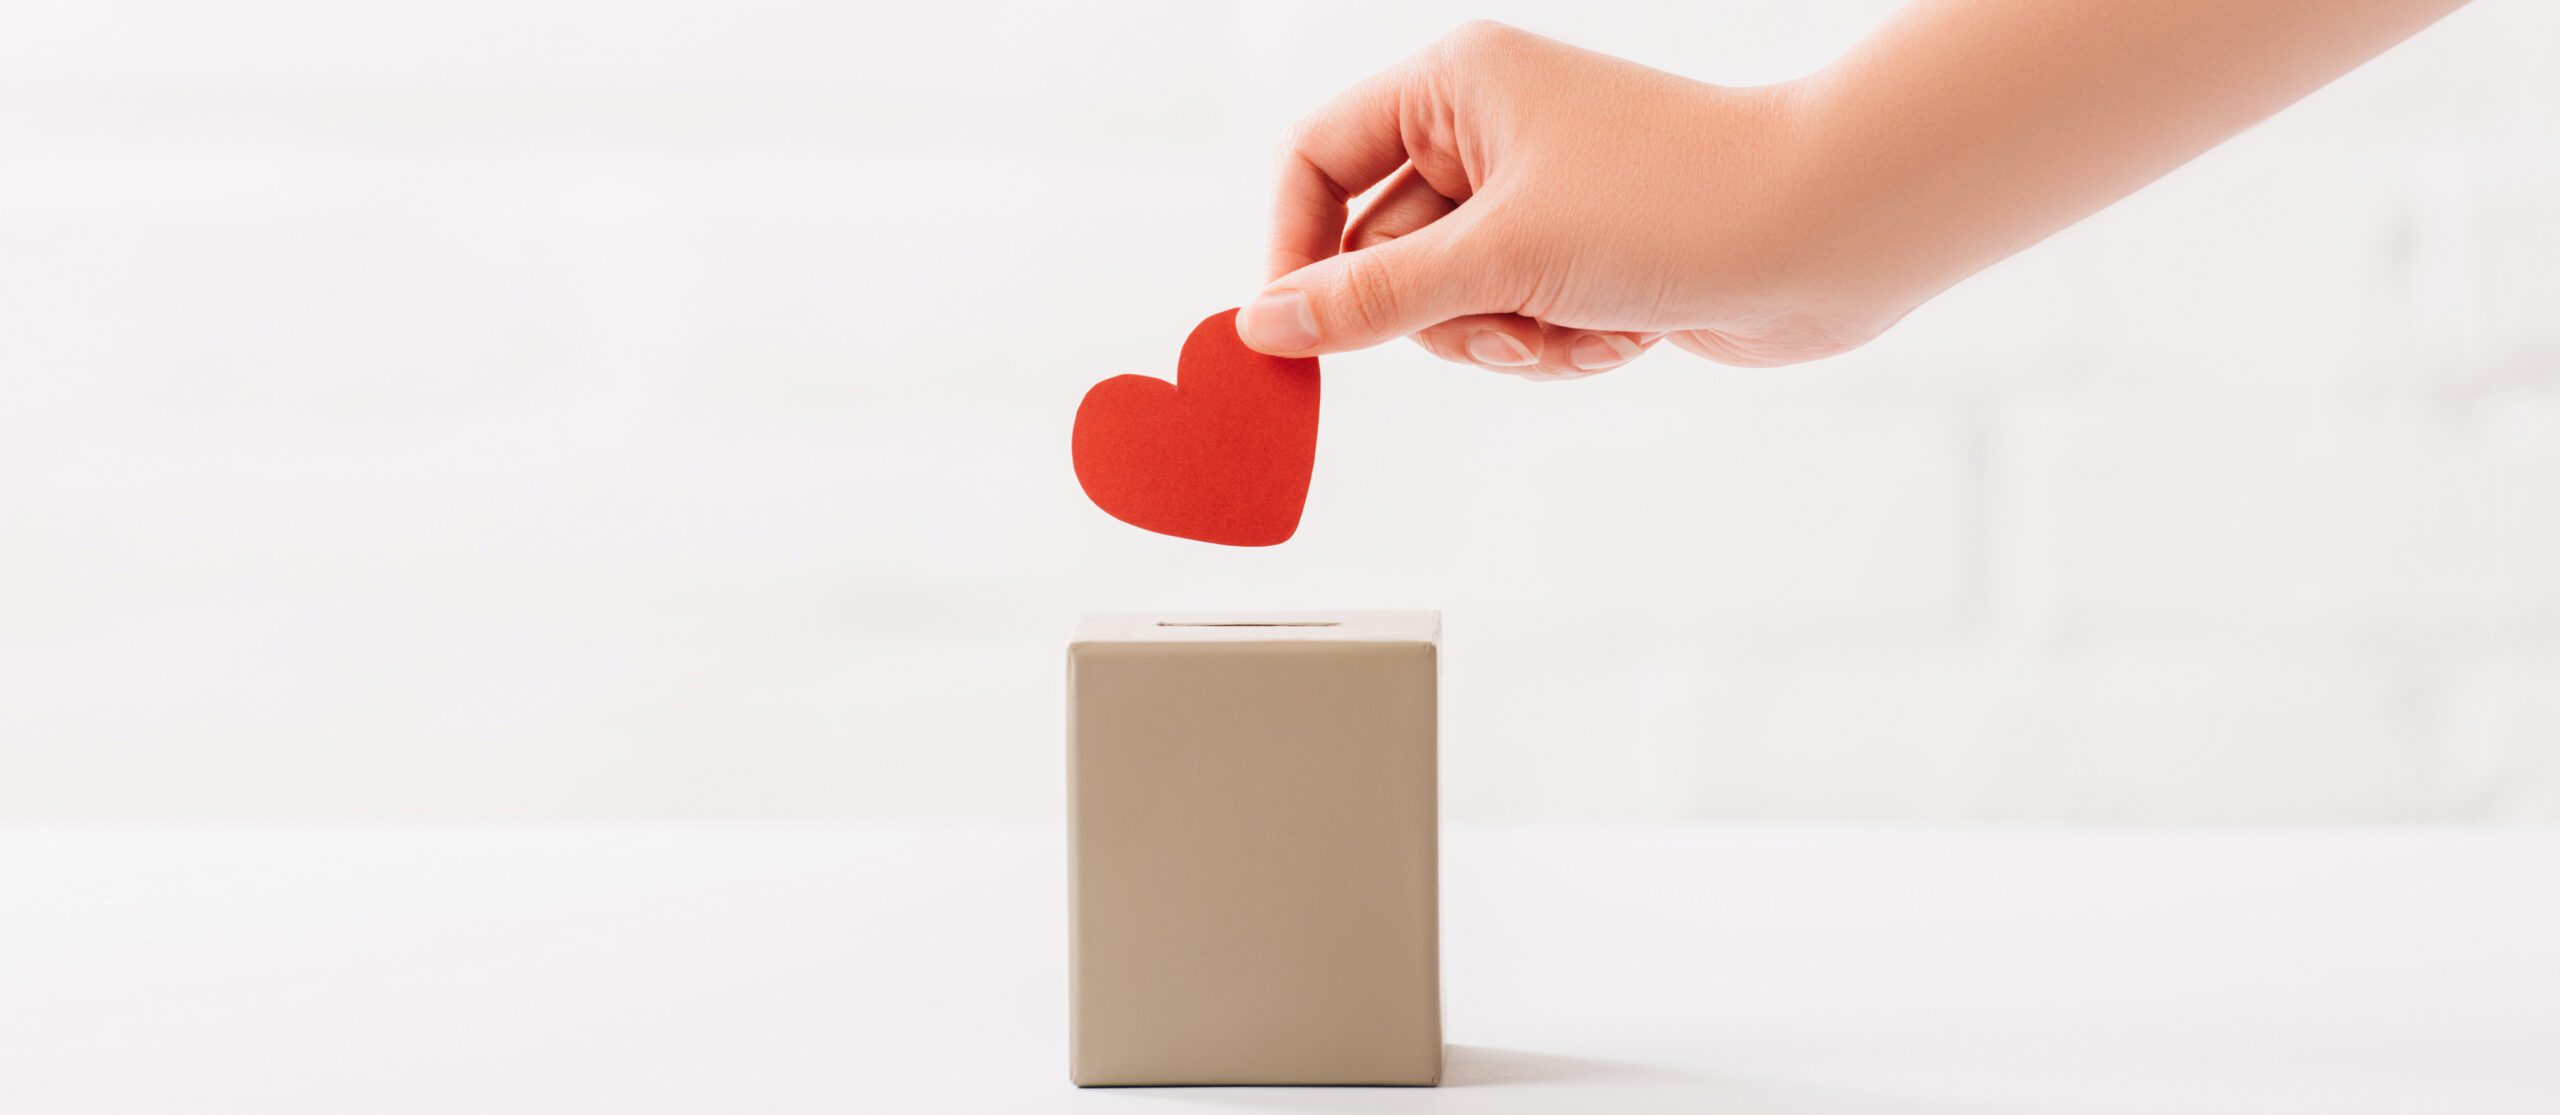 hand placing paper heart into box